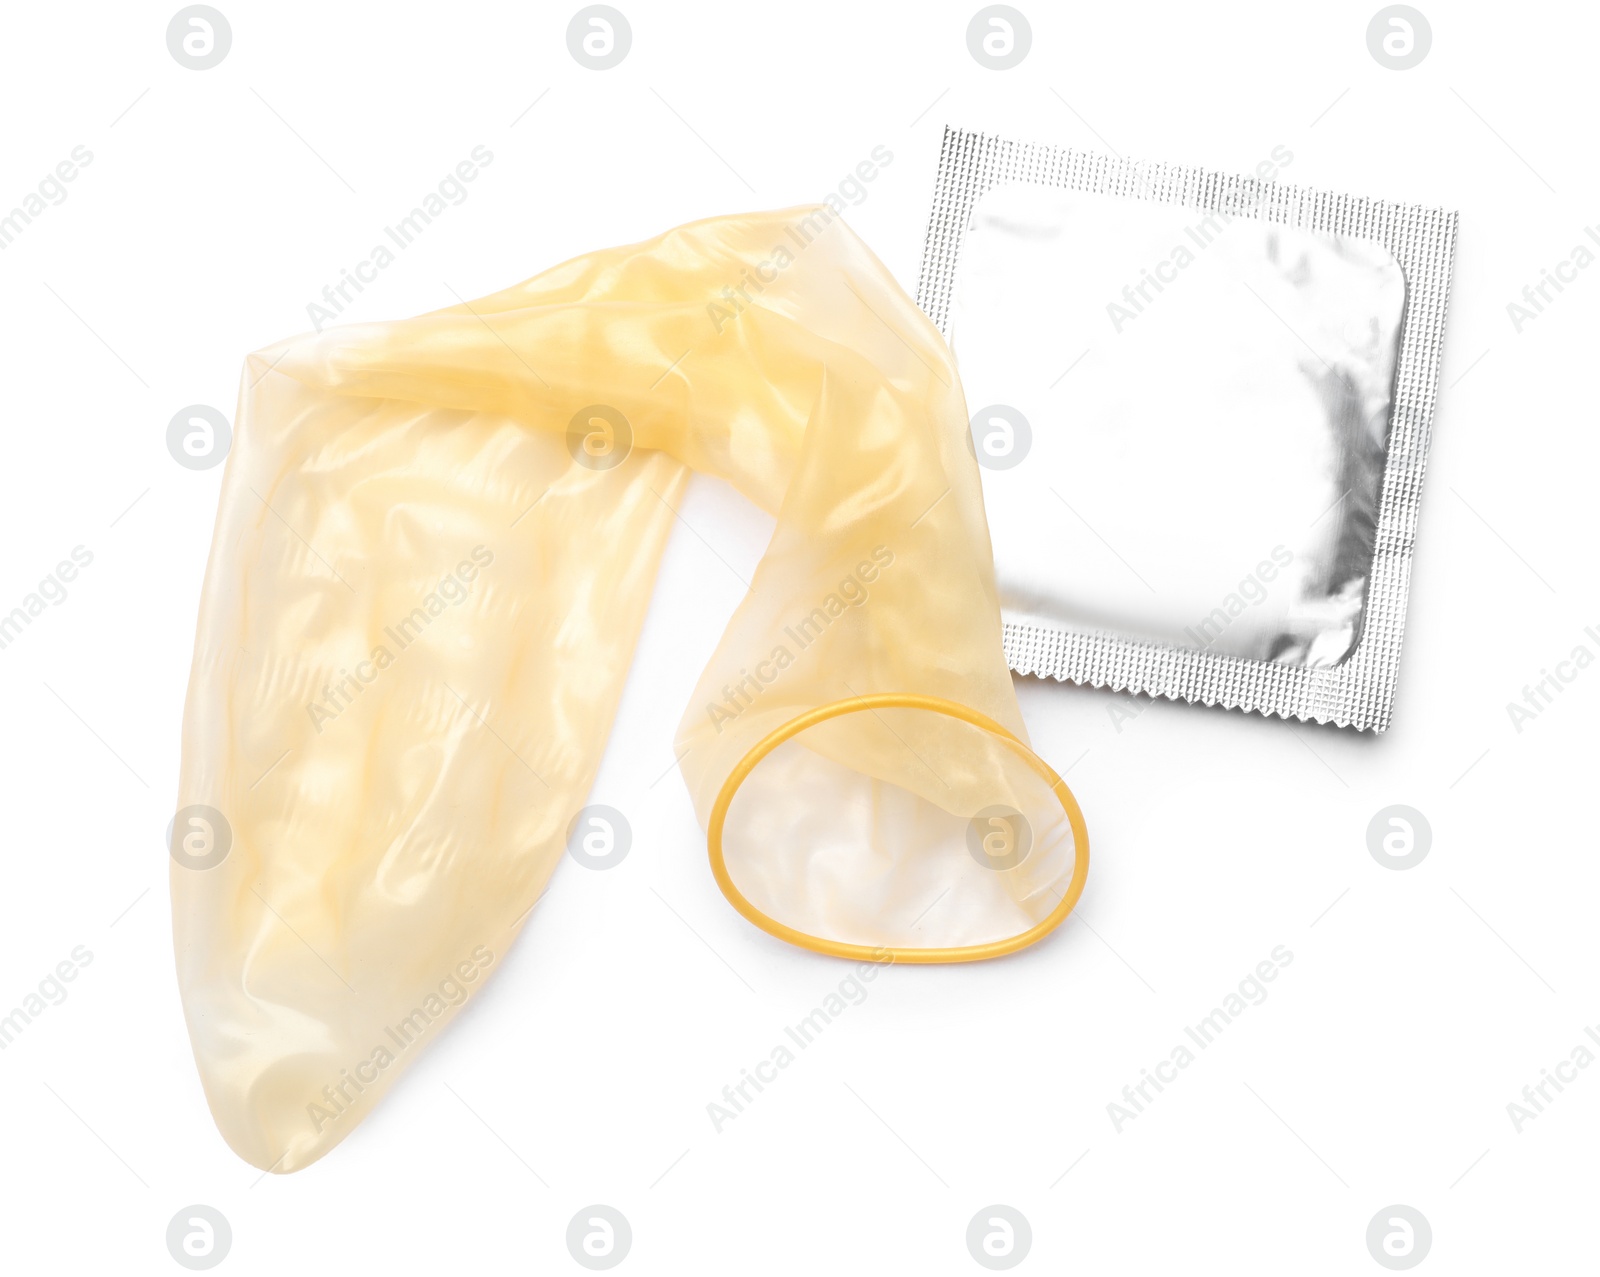 Image of Unrolled condom and package on white background, top view. Safe sex